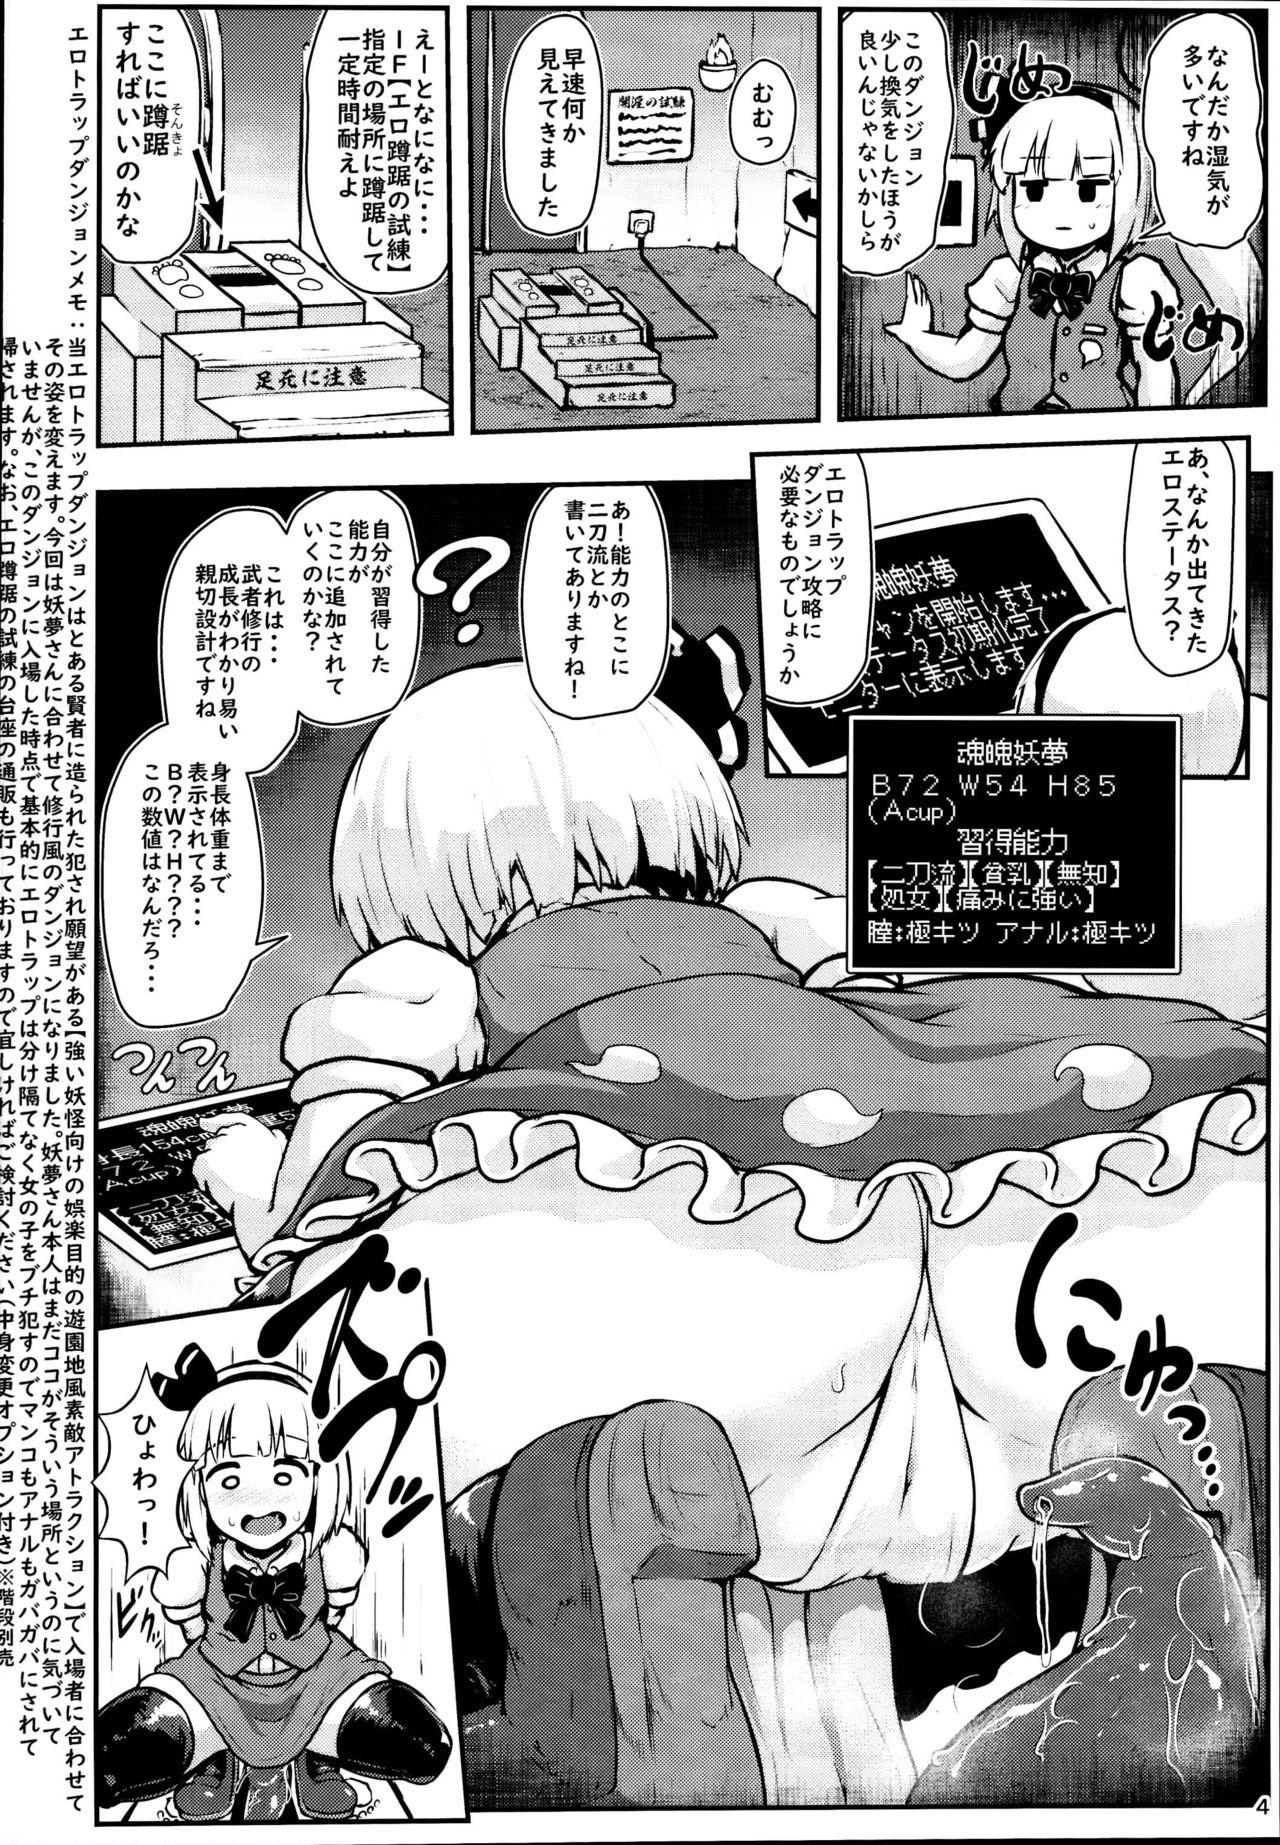 Chubby Youmu in Ero Trap Dungeon - Touhou project Uncensored - Page 4